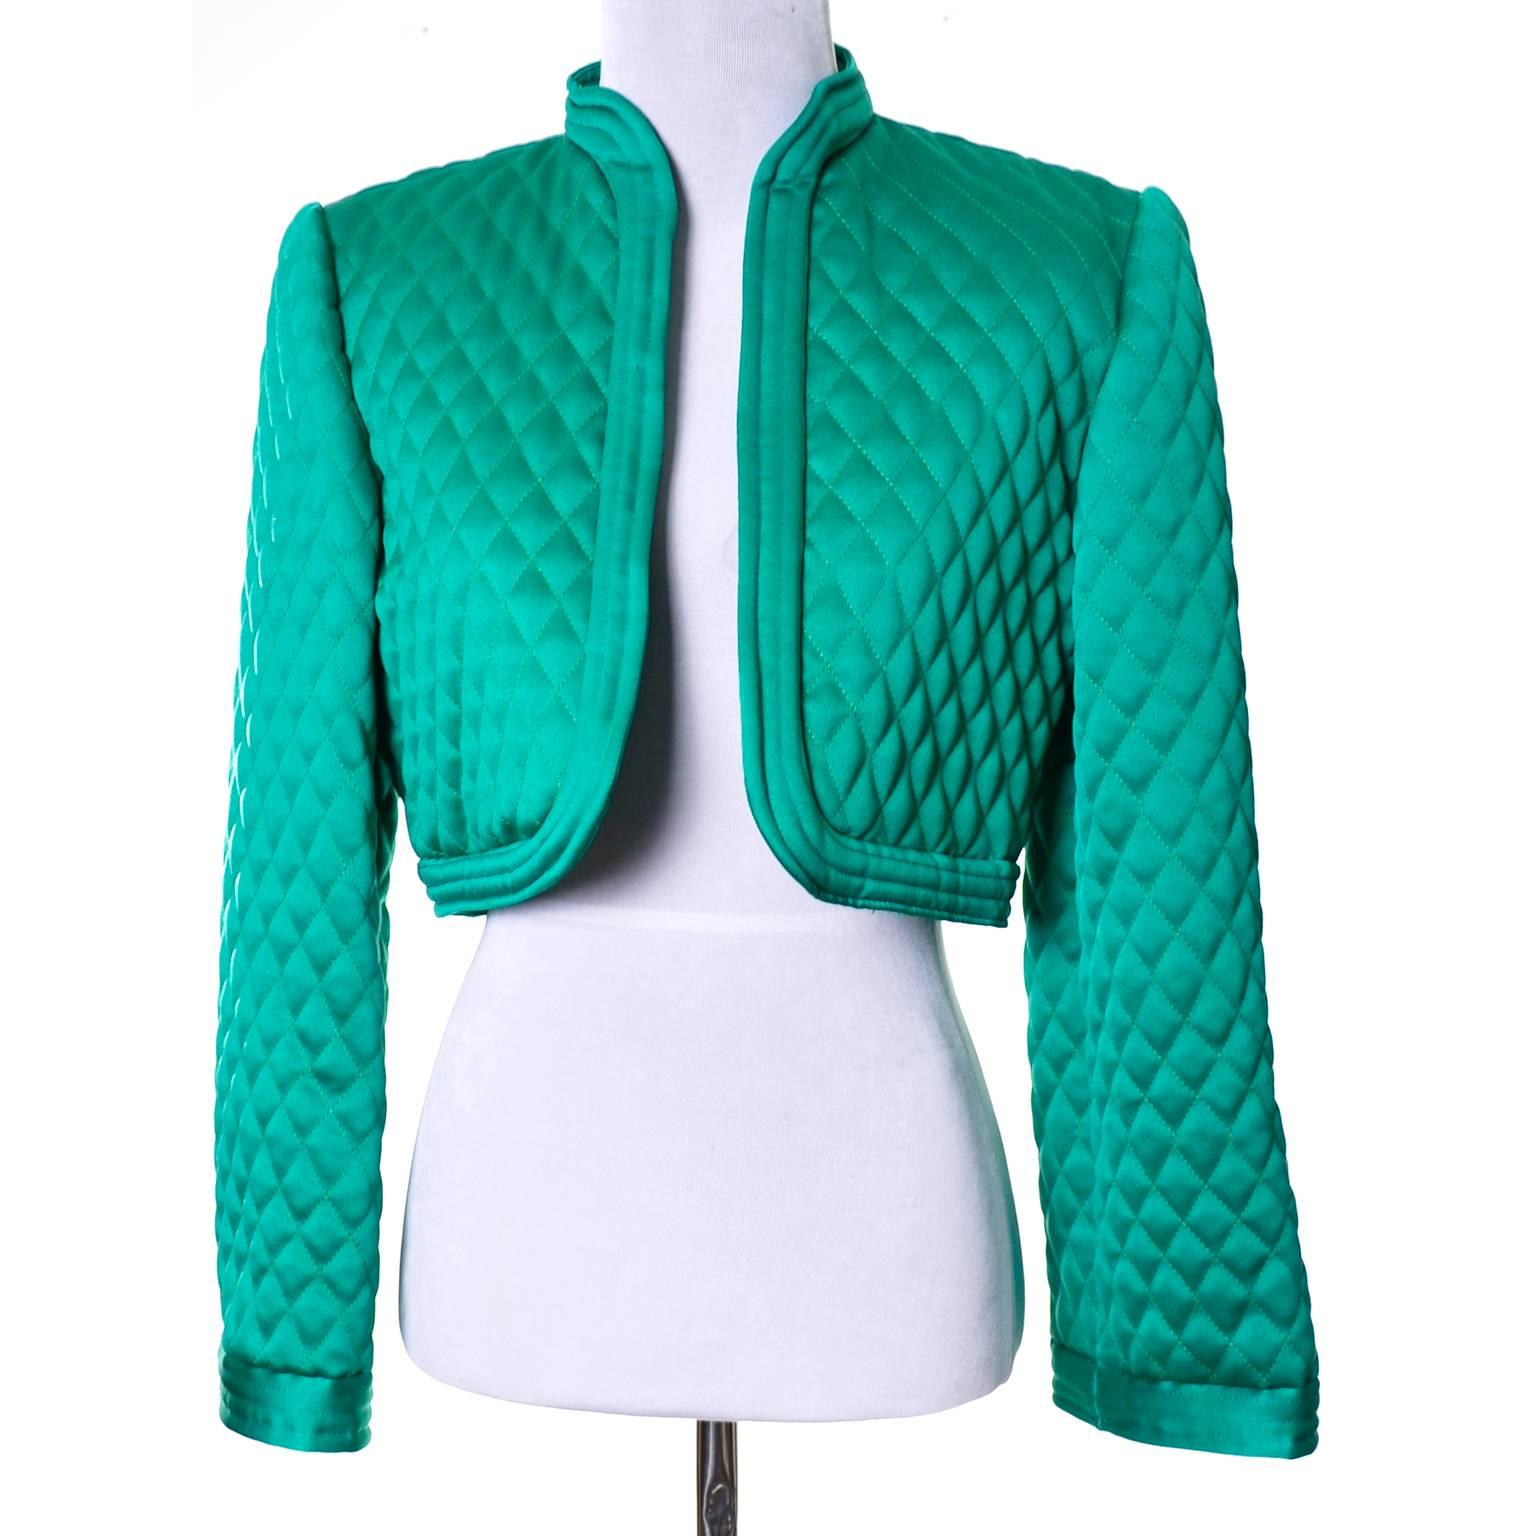 This pretty green vintage cropped jacket from Victor Costa is the perfect thing to wear over that sleeveless cocktail dress or with a pair of wide legged pants! The bolero is quilted satin and is open in the front. Designed by Victor Costa for